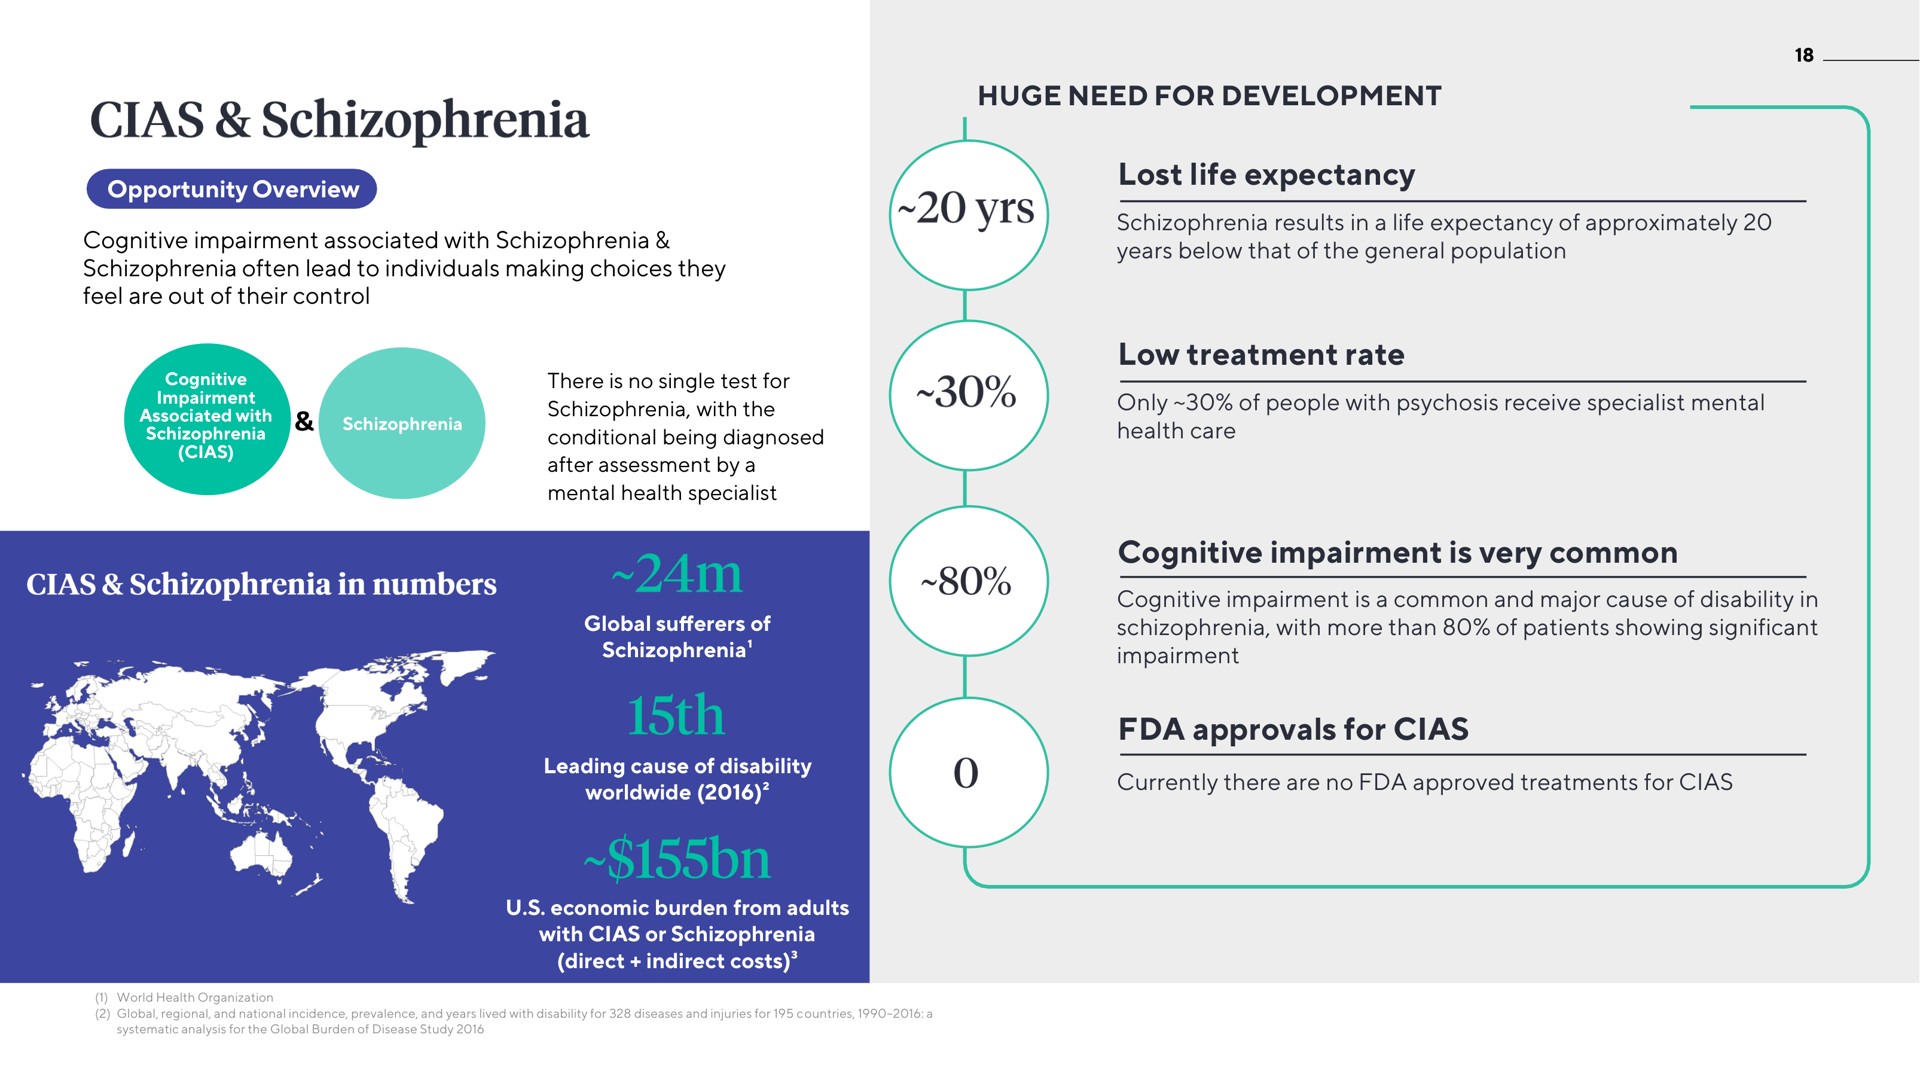 huge need for development lost life expectancy low treatment rate cognitive impairment is very common approvals for schizophrenia | ATAI